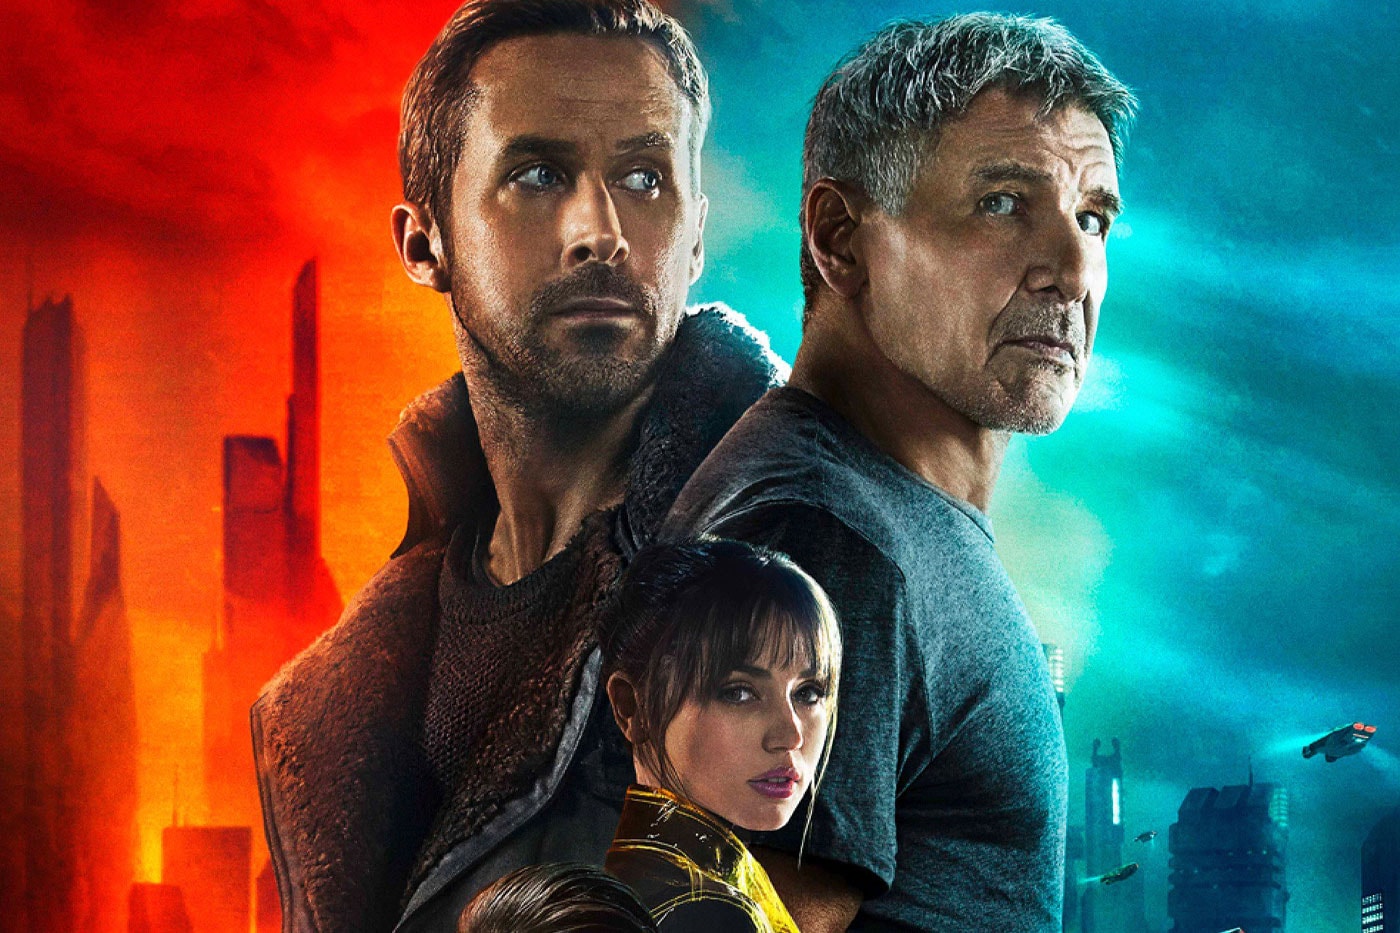 Director Ridley Scott Confirms 'Blade Runner' TV Series Currently in the Works harrison ford sci-fi denis villeneuve live-action